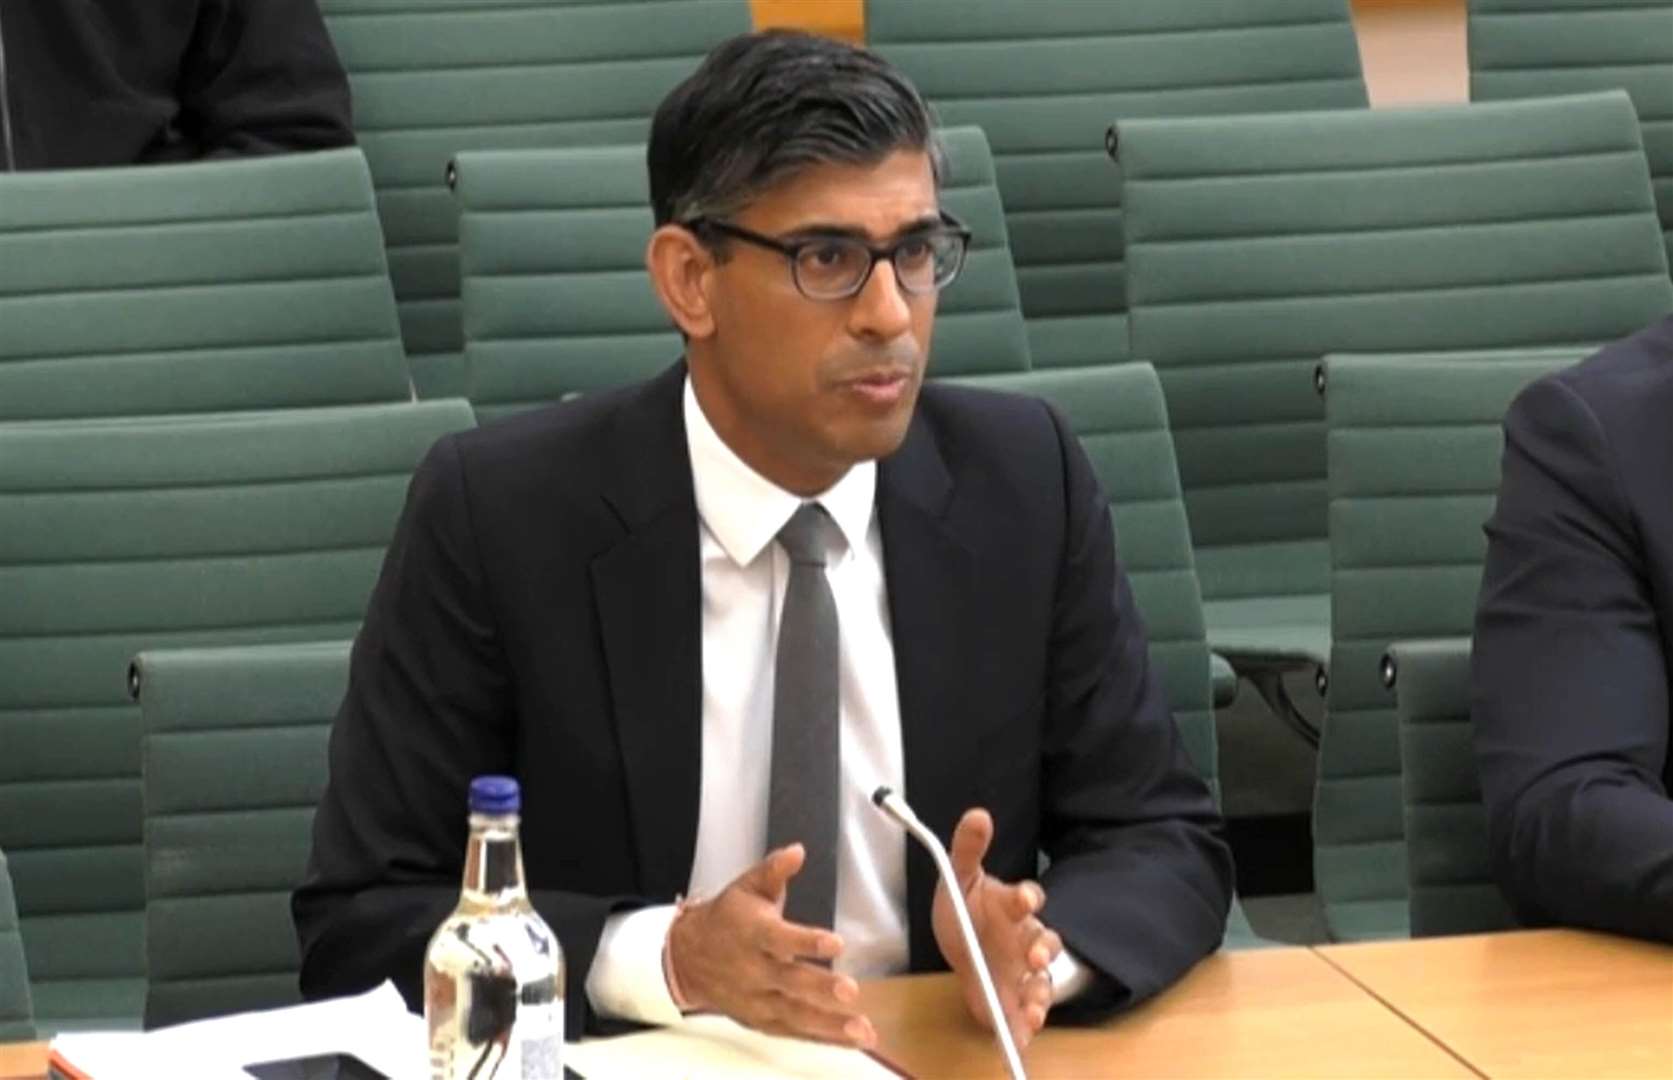 Mr Sunak answering questions at a Treasury Select Committee hearing in the House of Commons (House of Commons/PA)